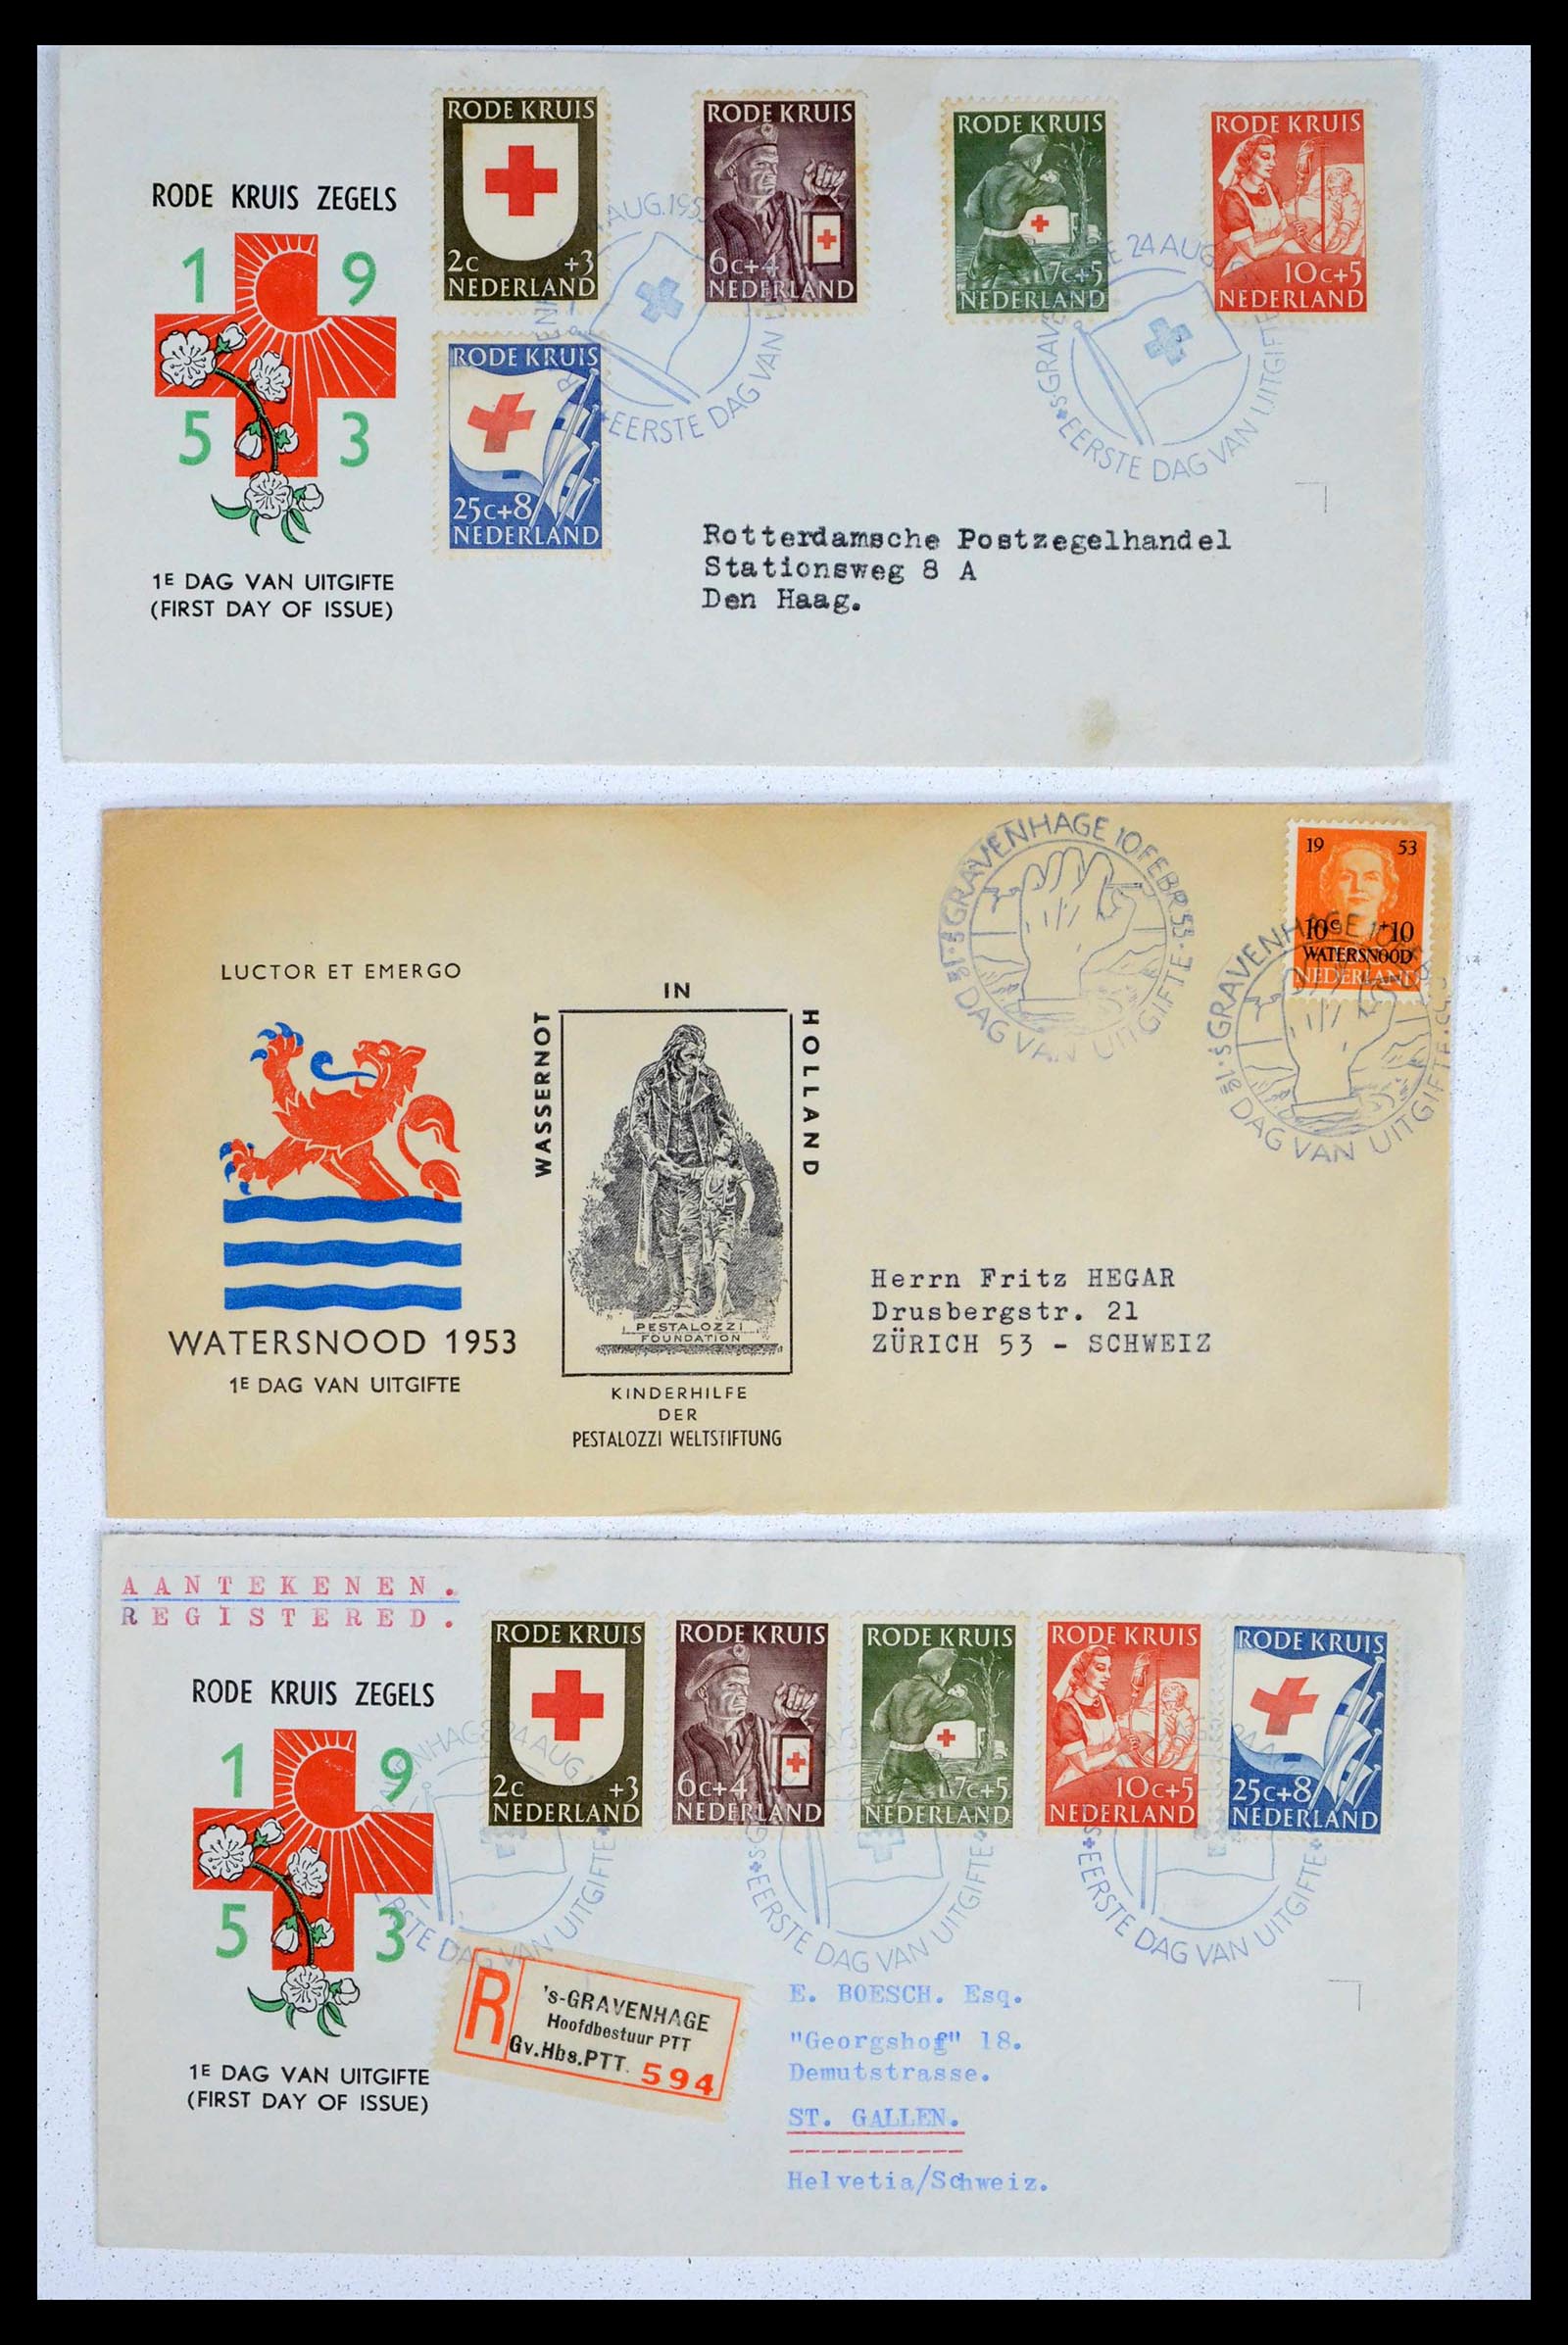 39474 0008 - Stamp collection 39474 Netherlands FDC's 1950-1960.